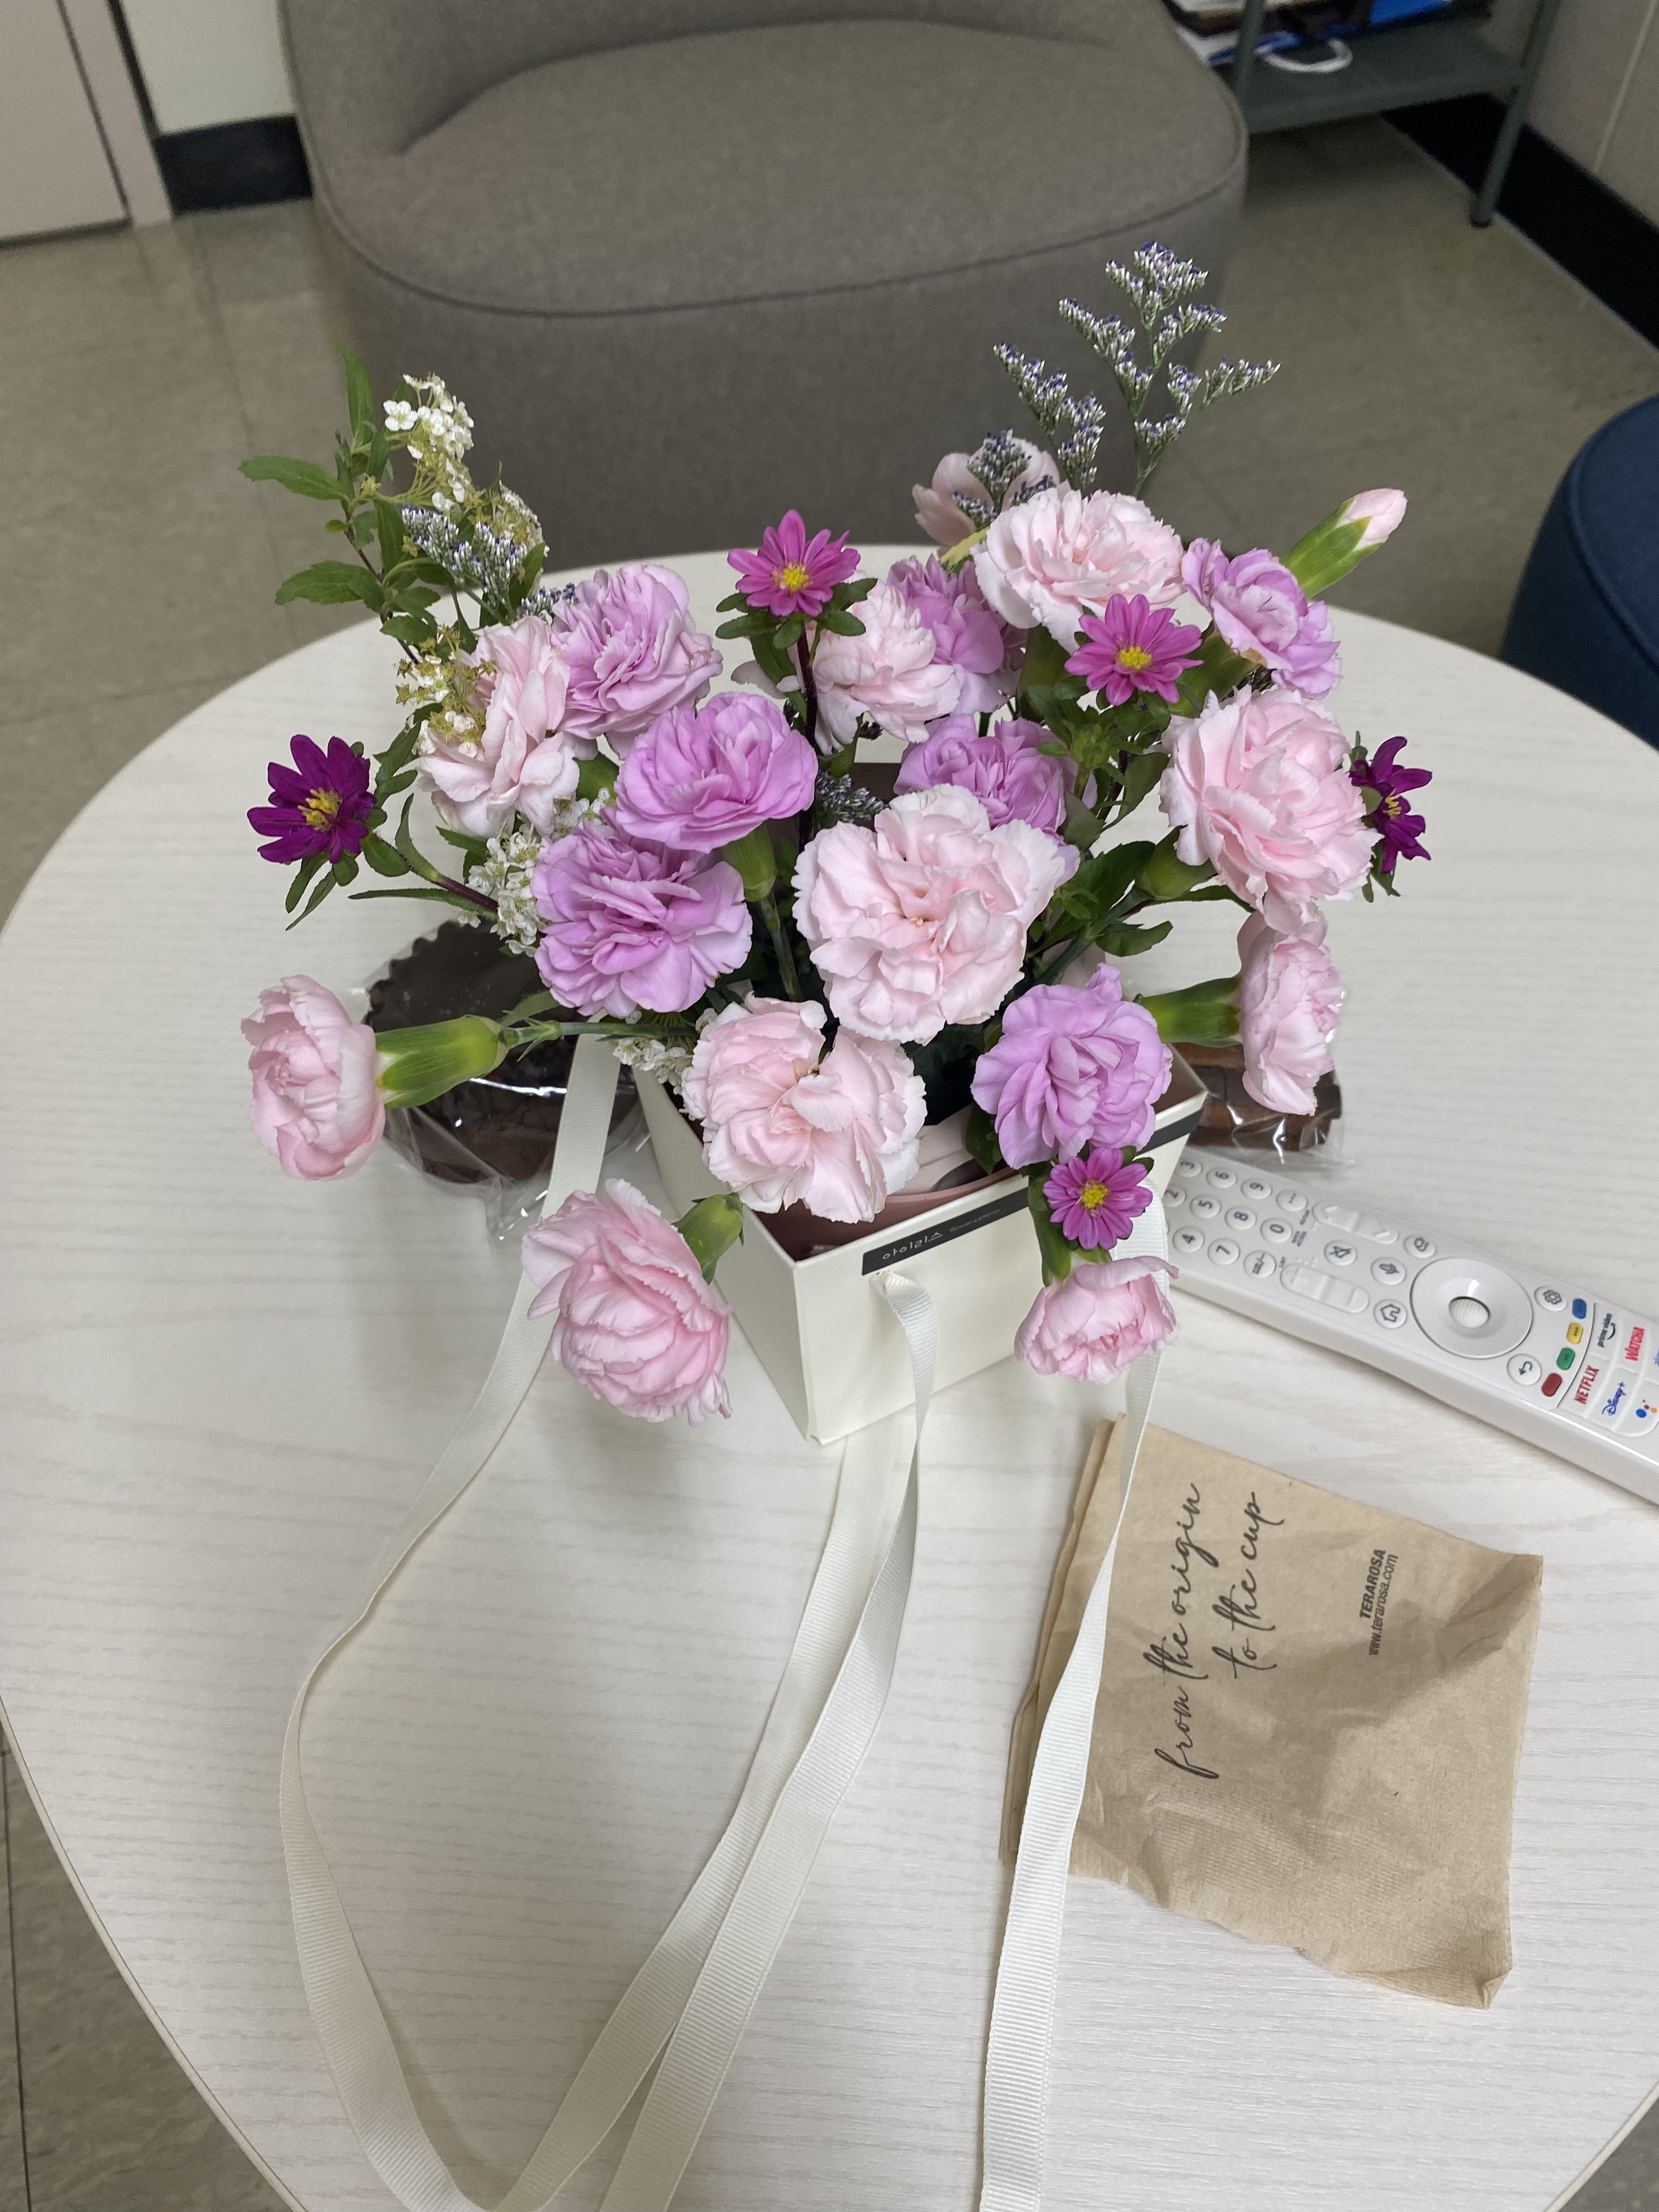 Carnation from students